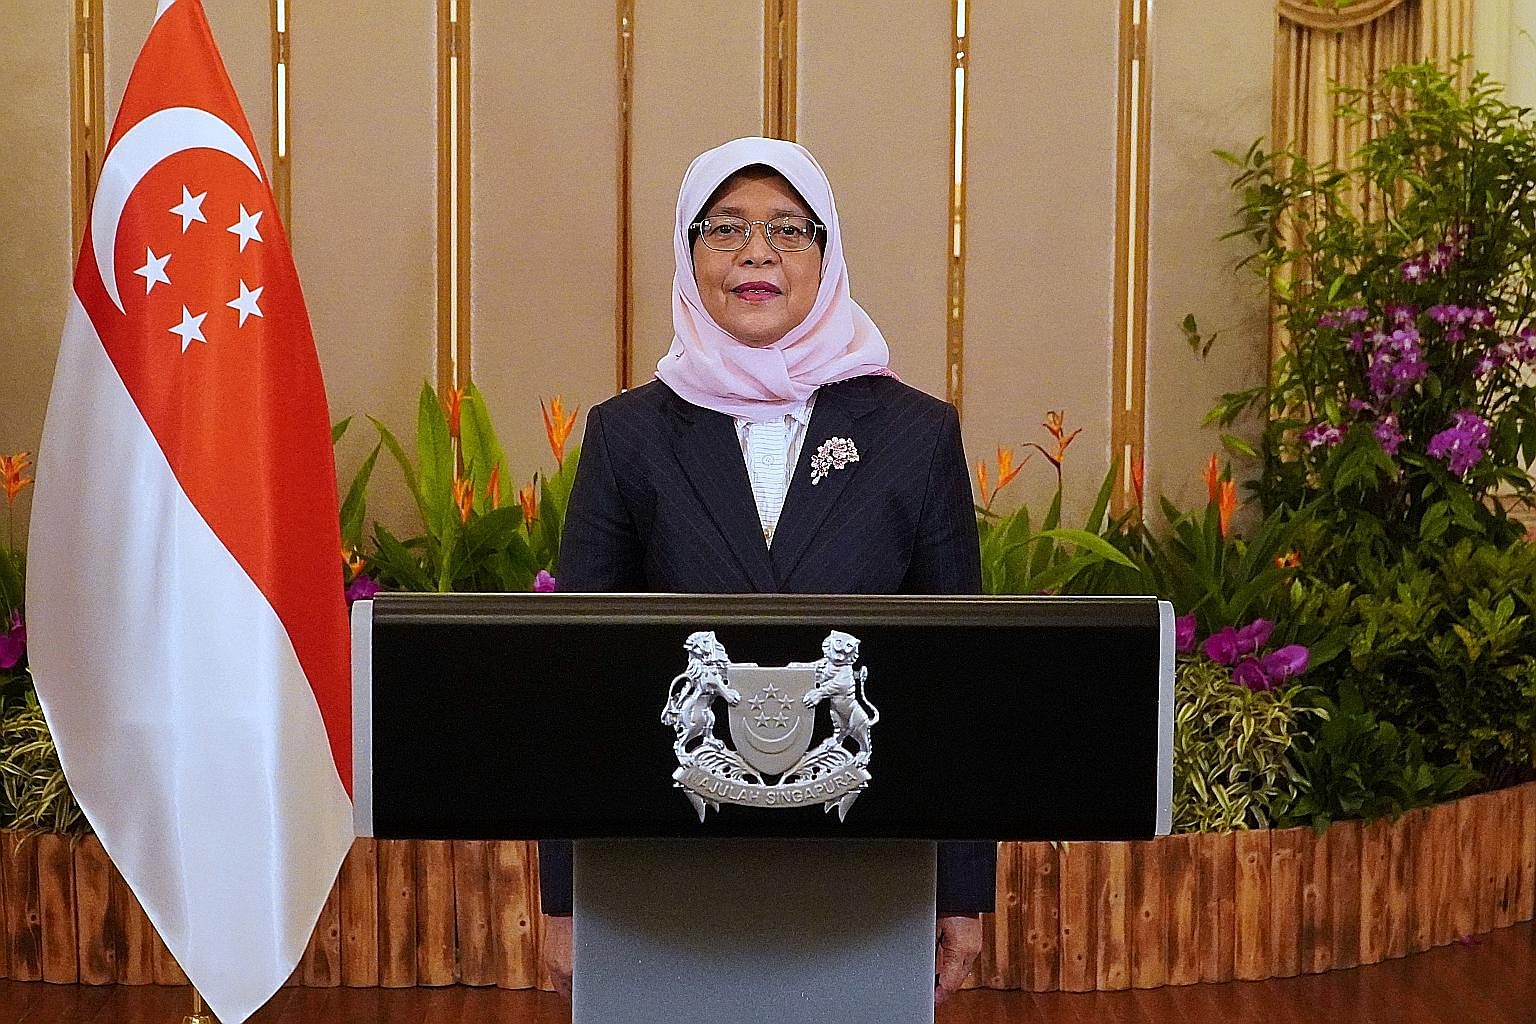 President Halimah Yacob, speaking during the first day of the virtual United Nations Global Compact Leaders Summit, said sustainability has always been an integral part of Singapore's development journey.